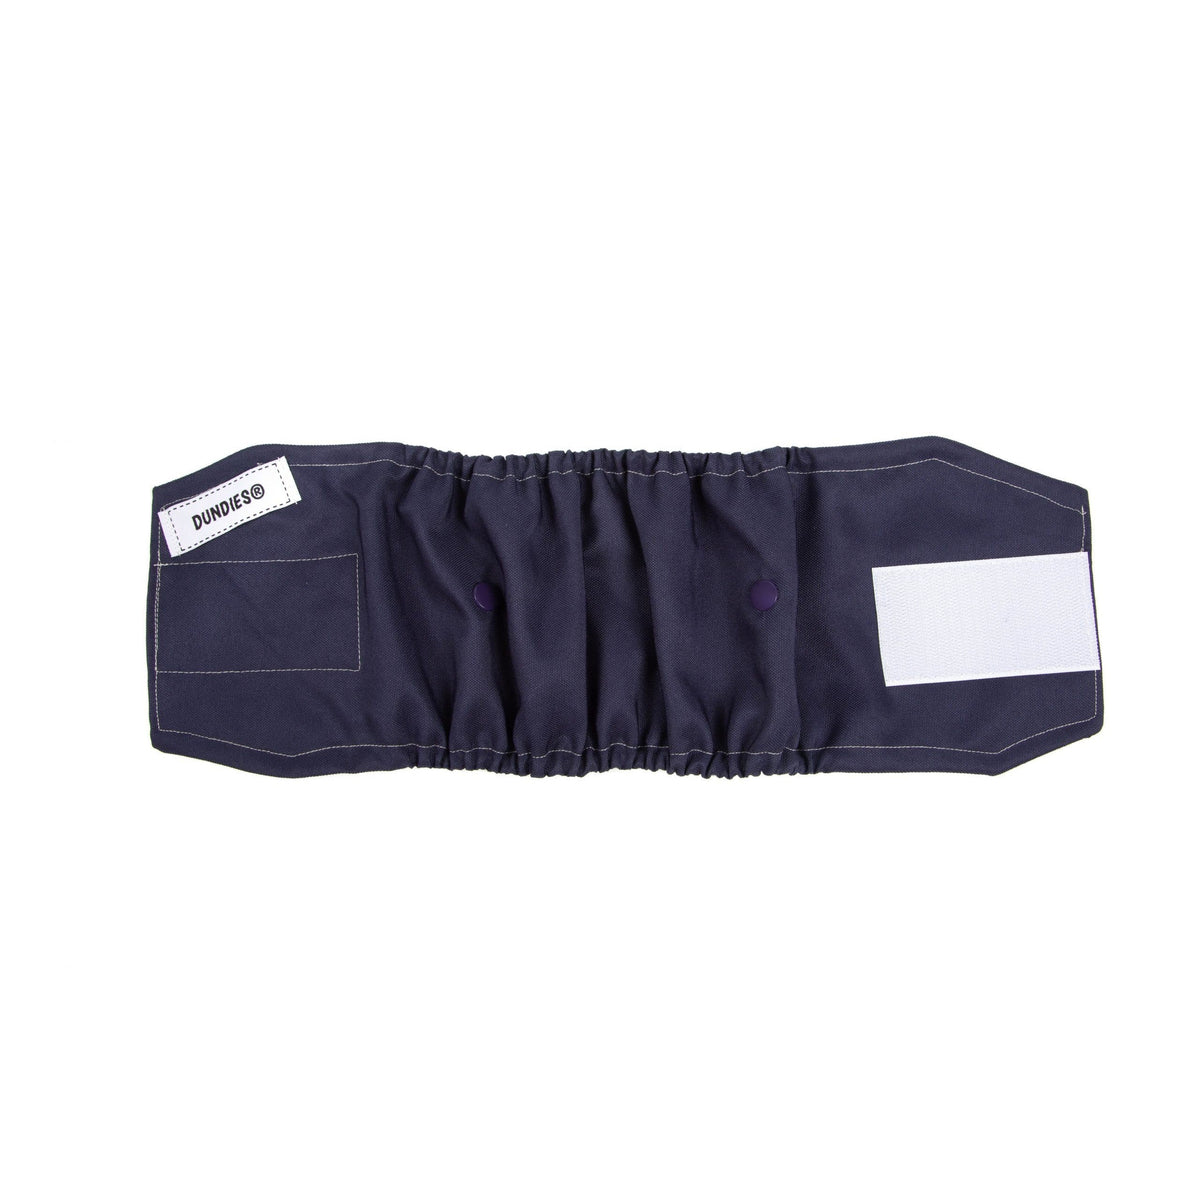 Dundies Navy Belly Band-Dundies Australia - Vet Recommended Pet Nappies